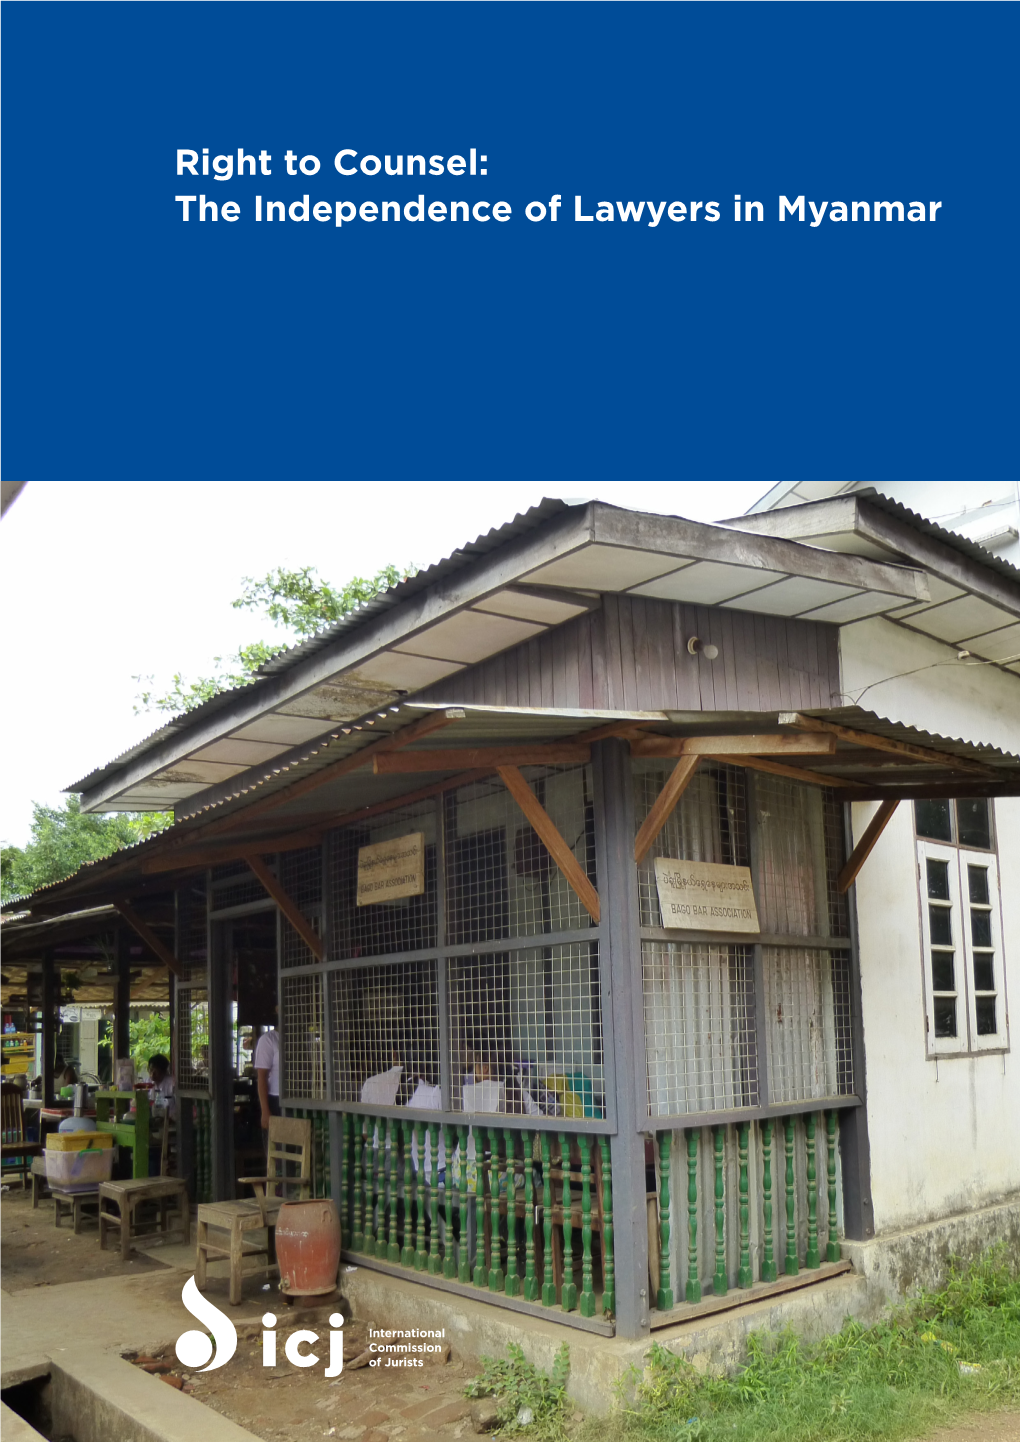 Right to Counsel: the Independence of Lawyers in Myanmar